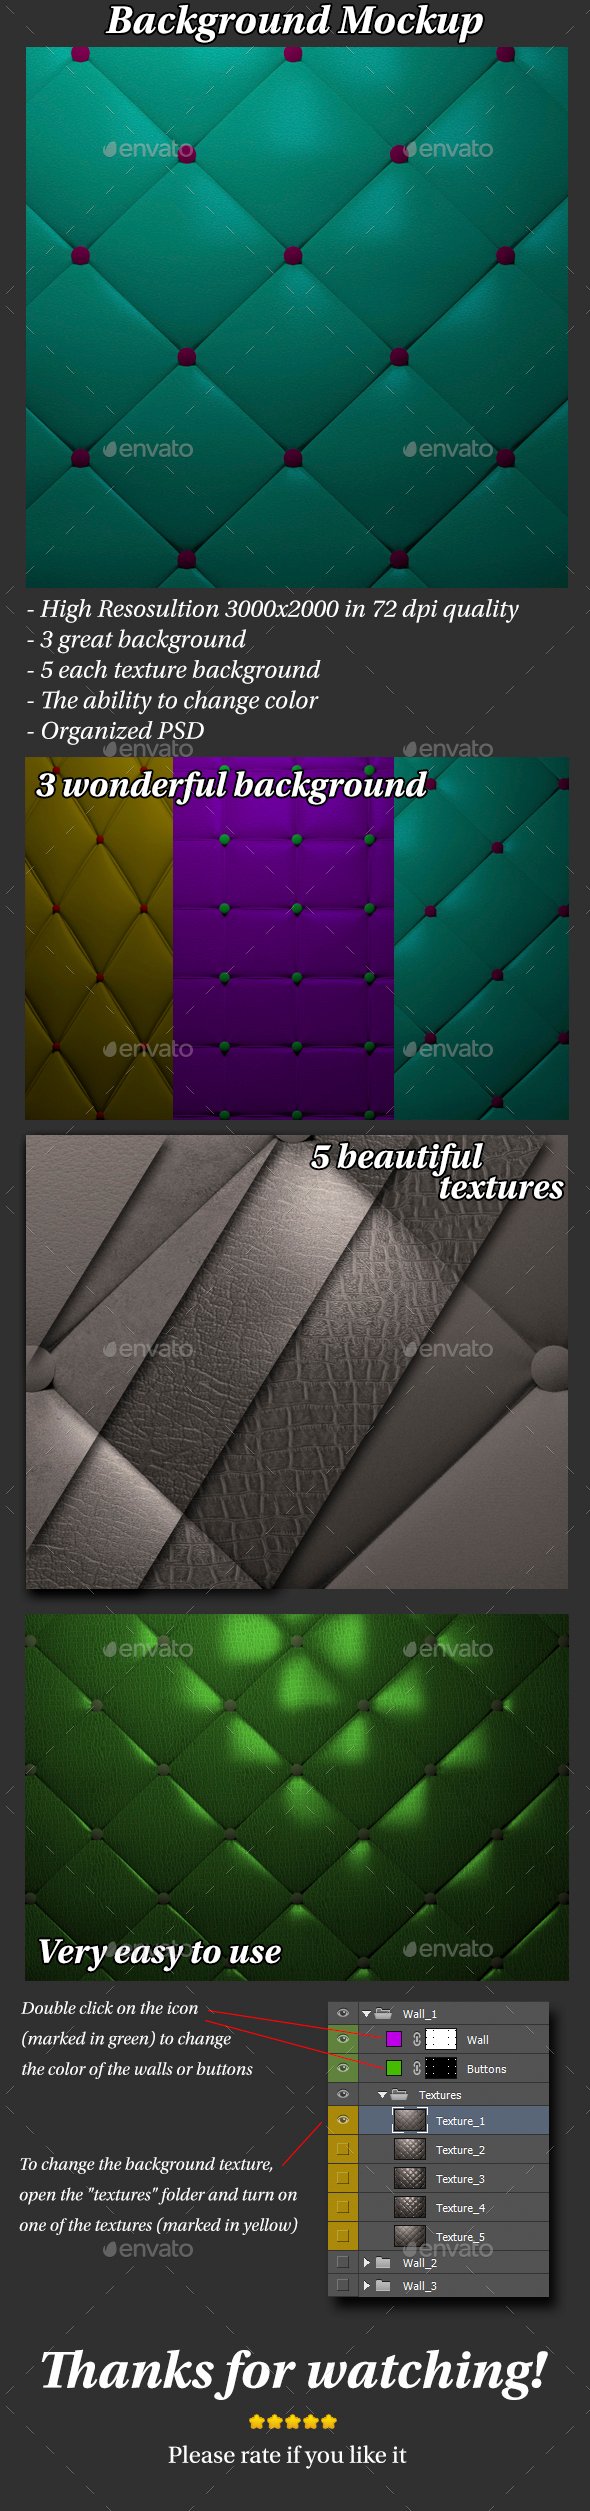 Different Color Textured Mockup Background PSD